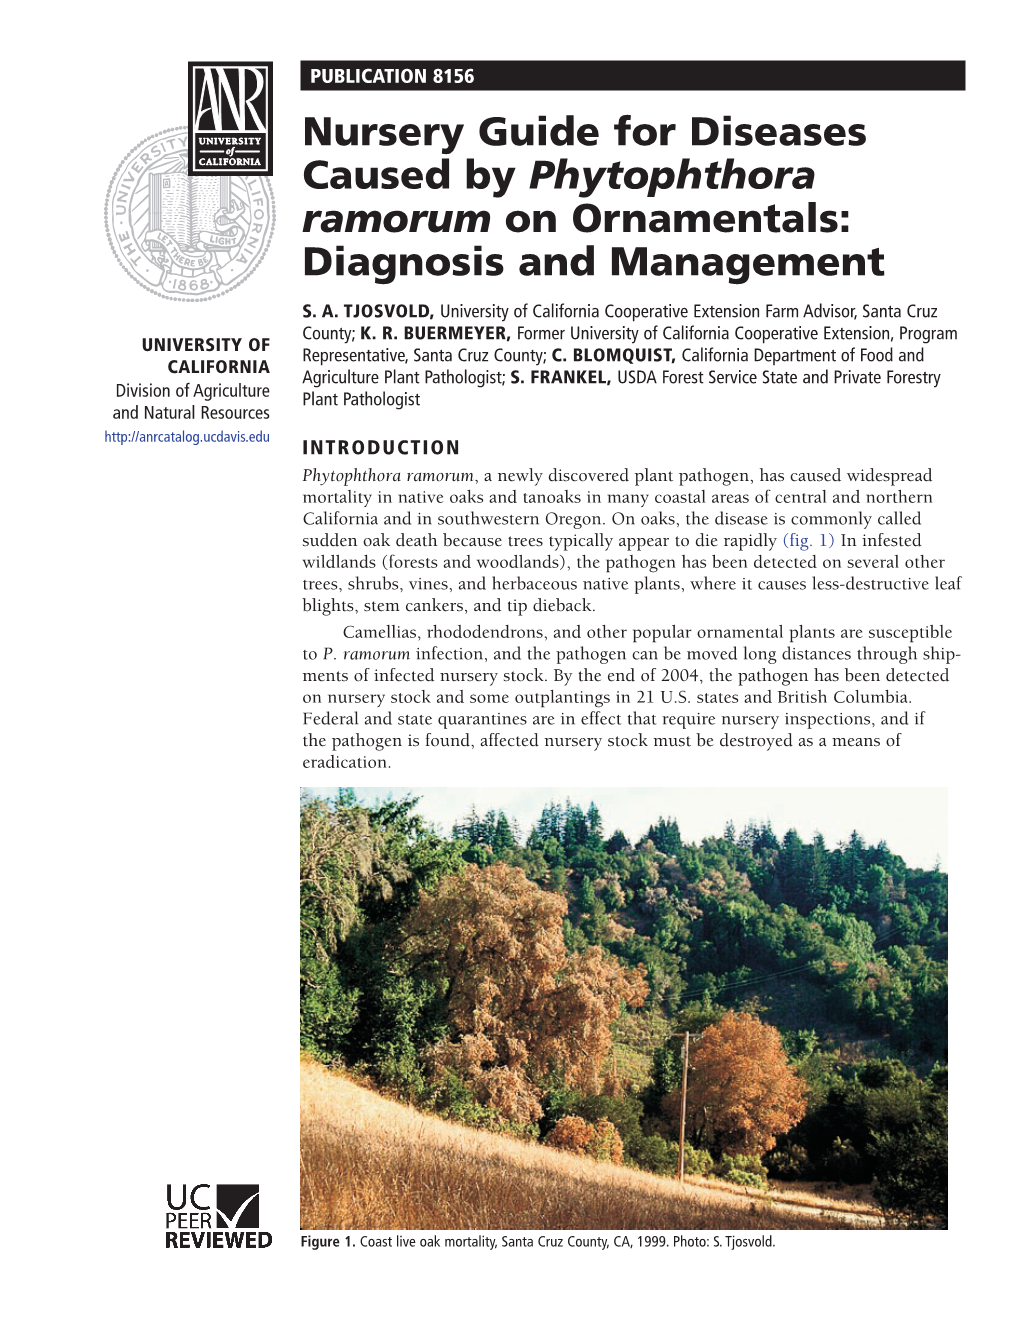 Nursery Guide for Diseases Caused by Phytophthora Ramorum on Ornamentals: Diagnosis and Management